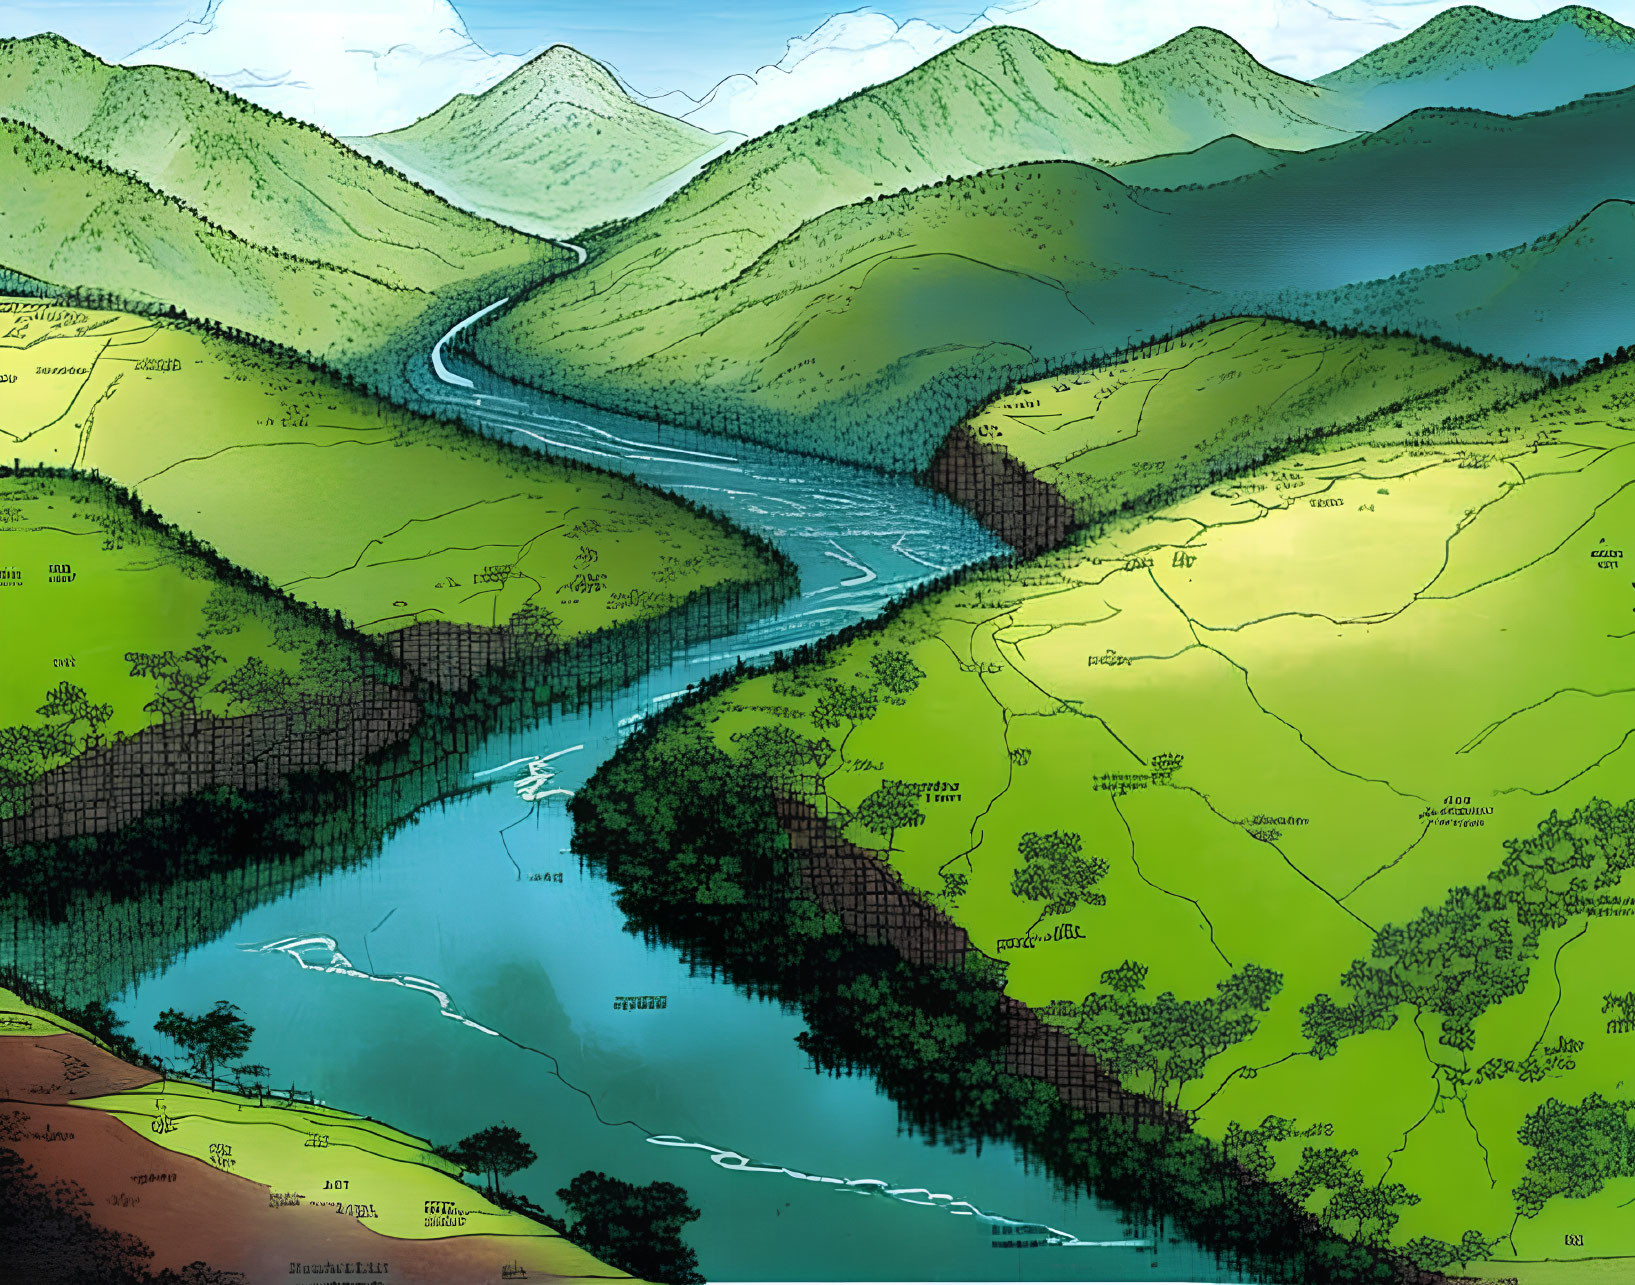 Illustrated landscape of winding river in lush valley with hills and mountains under hazy sky